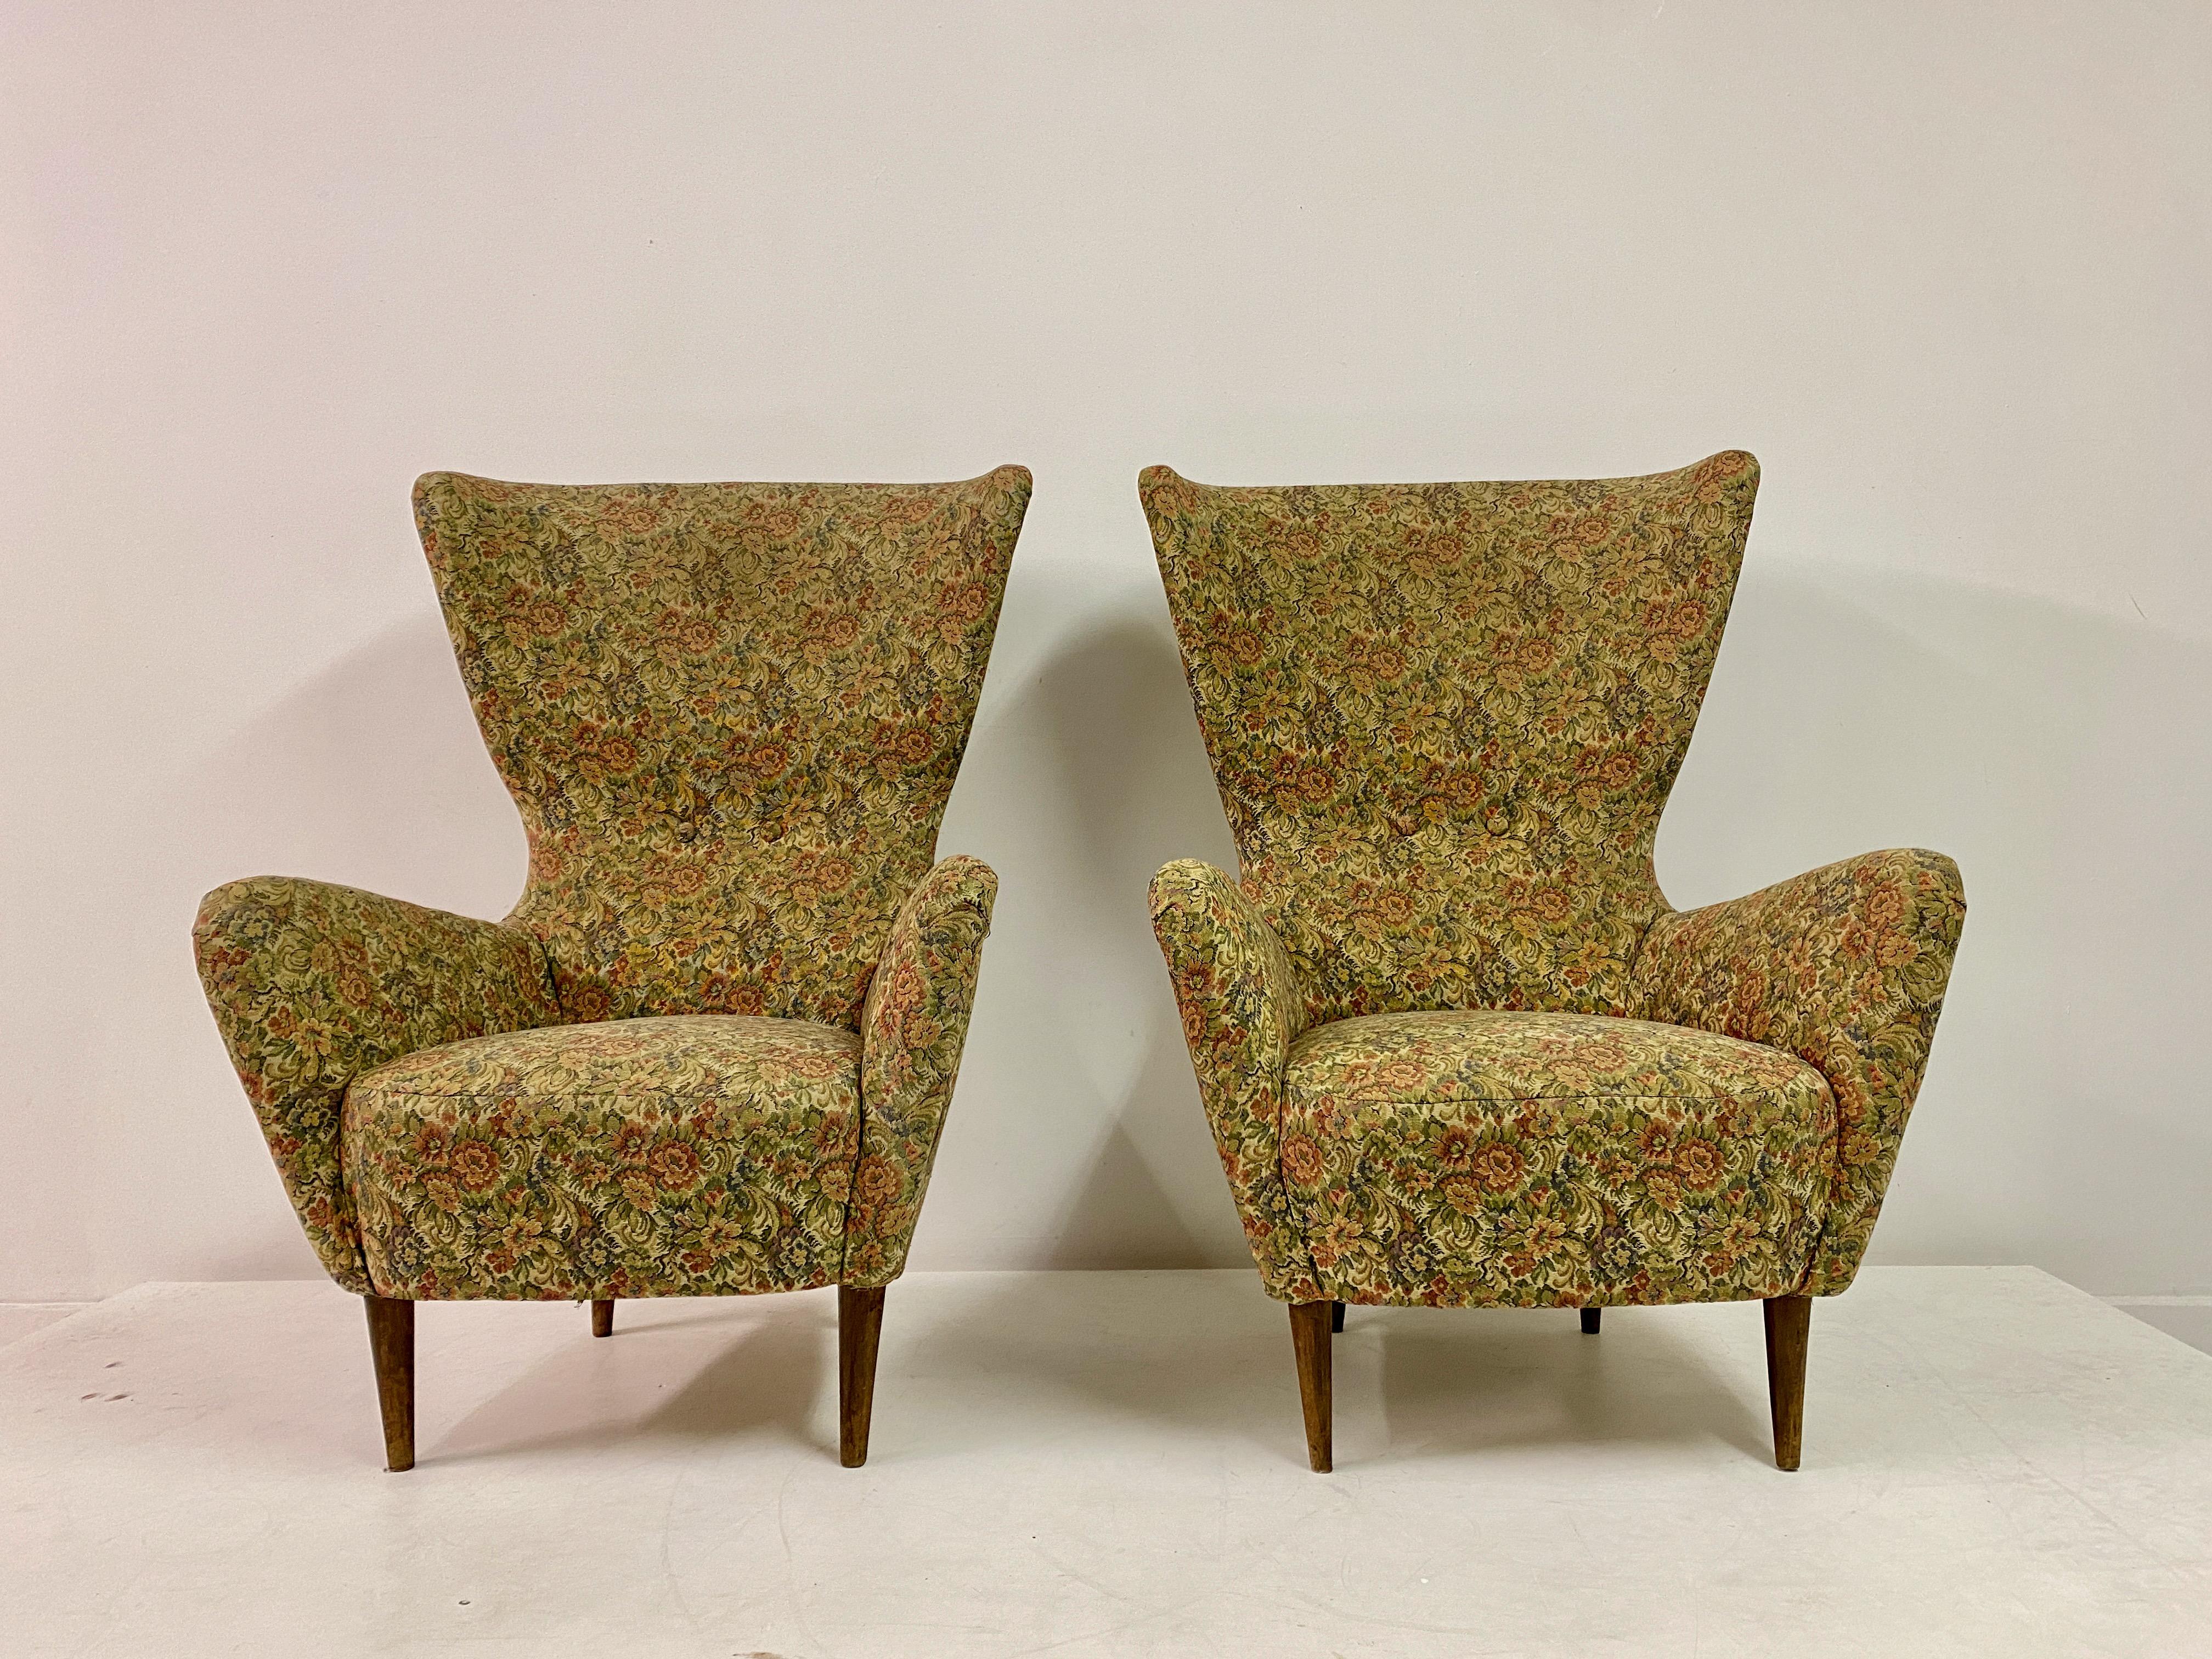 Pair of armchairs

High wing back

Turned wooden legs

Seat height 40cm

Italy 1950s

Will benefit from reupholstery which can be arranged. Please ask for more information.